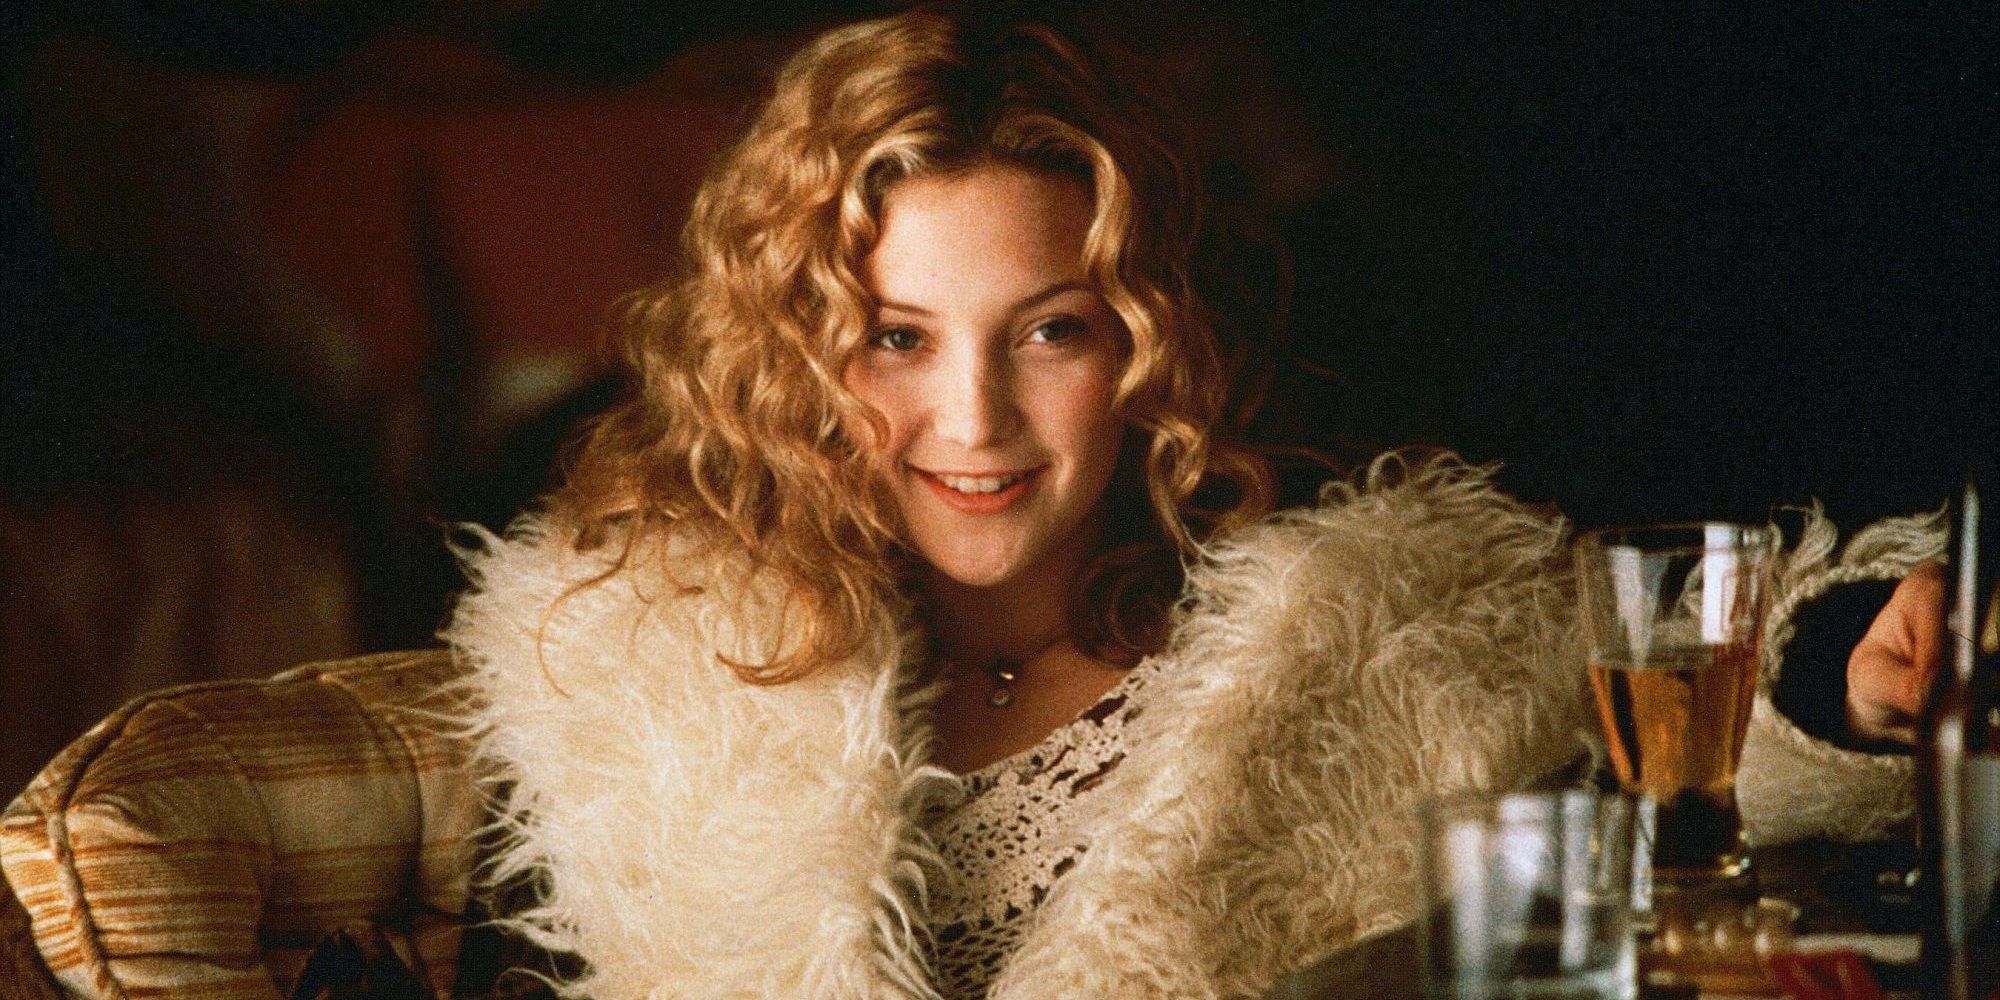 Penny smiling in Almost Famous